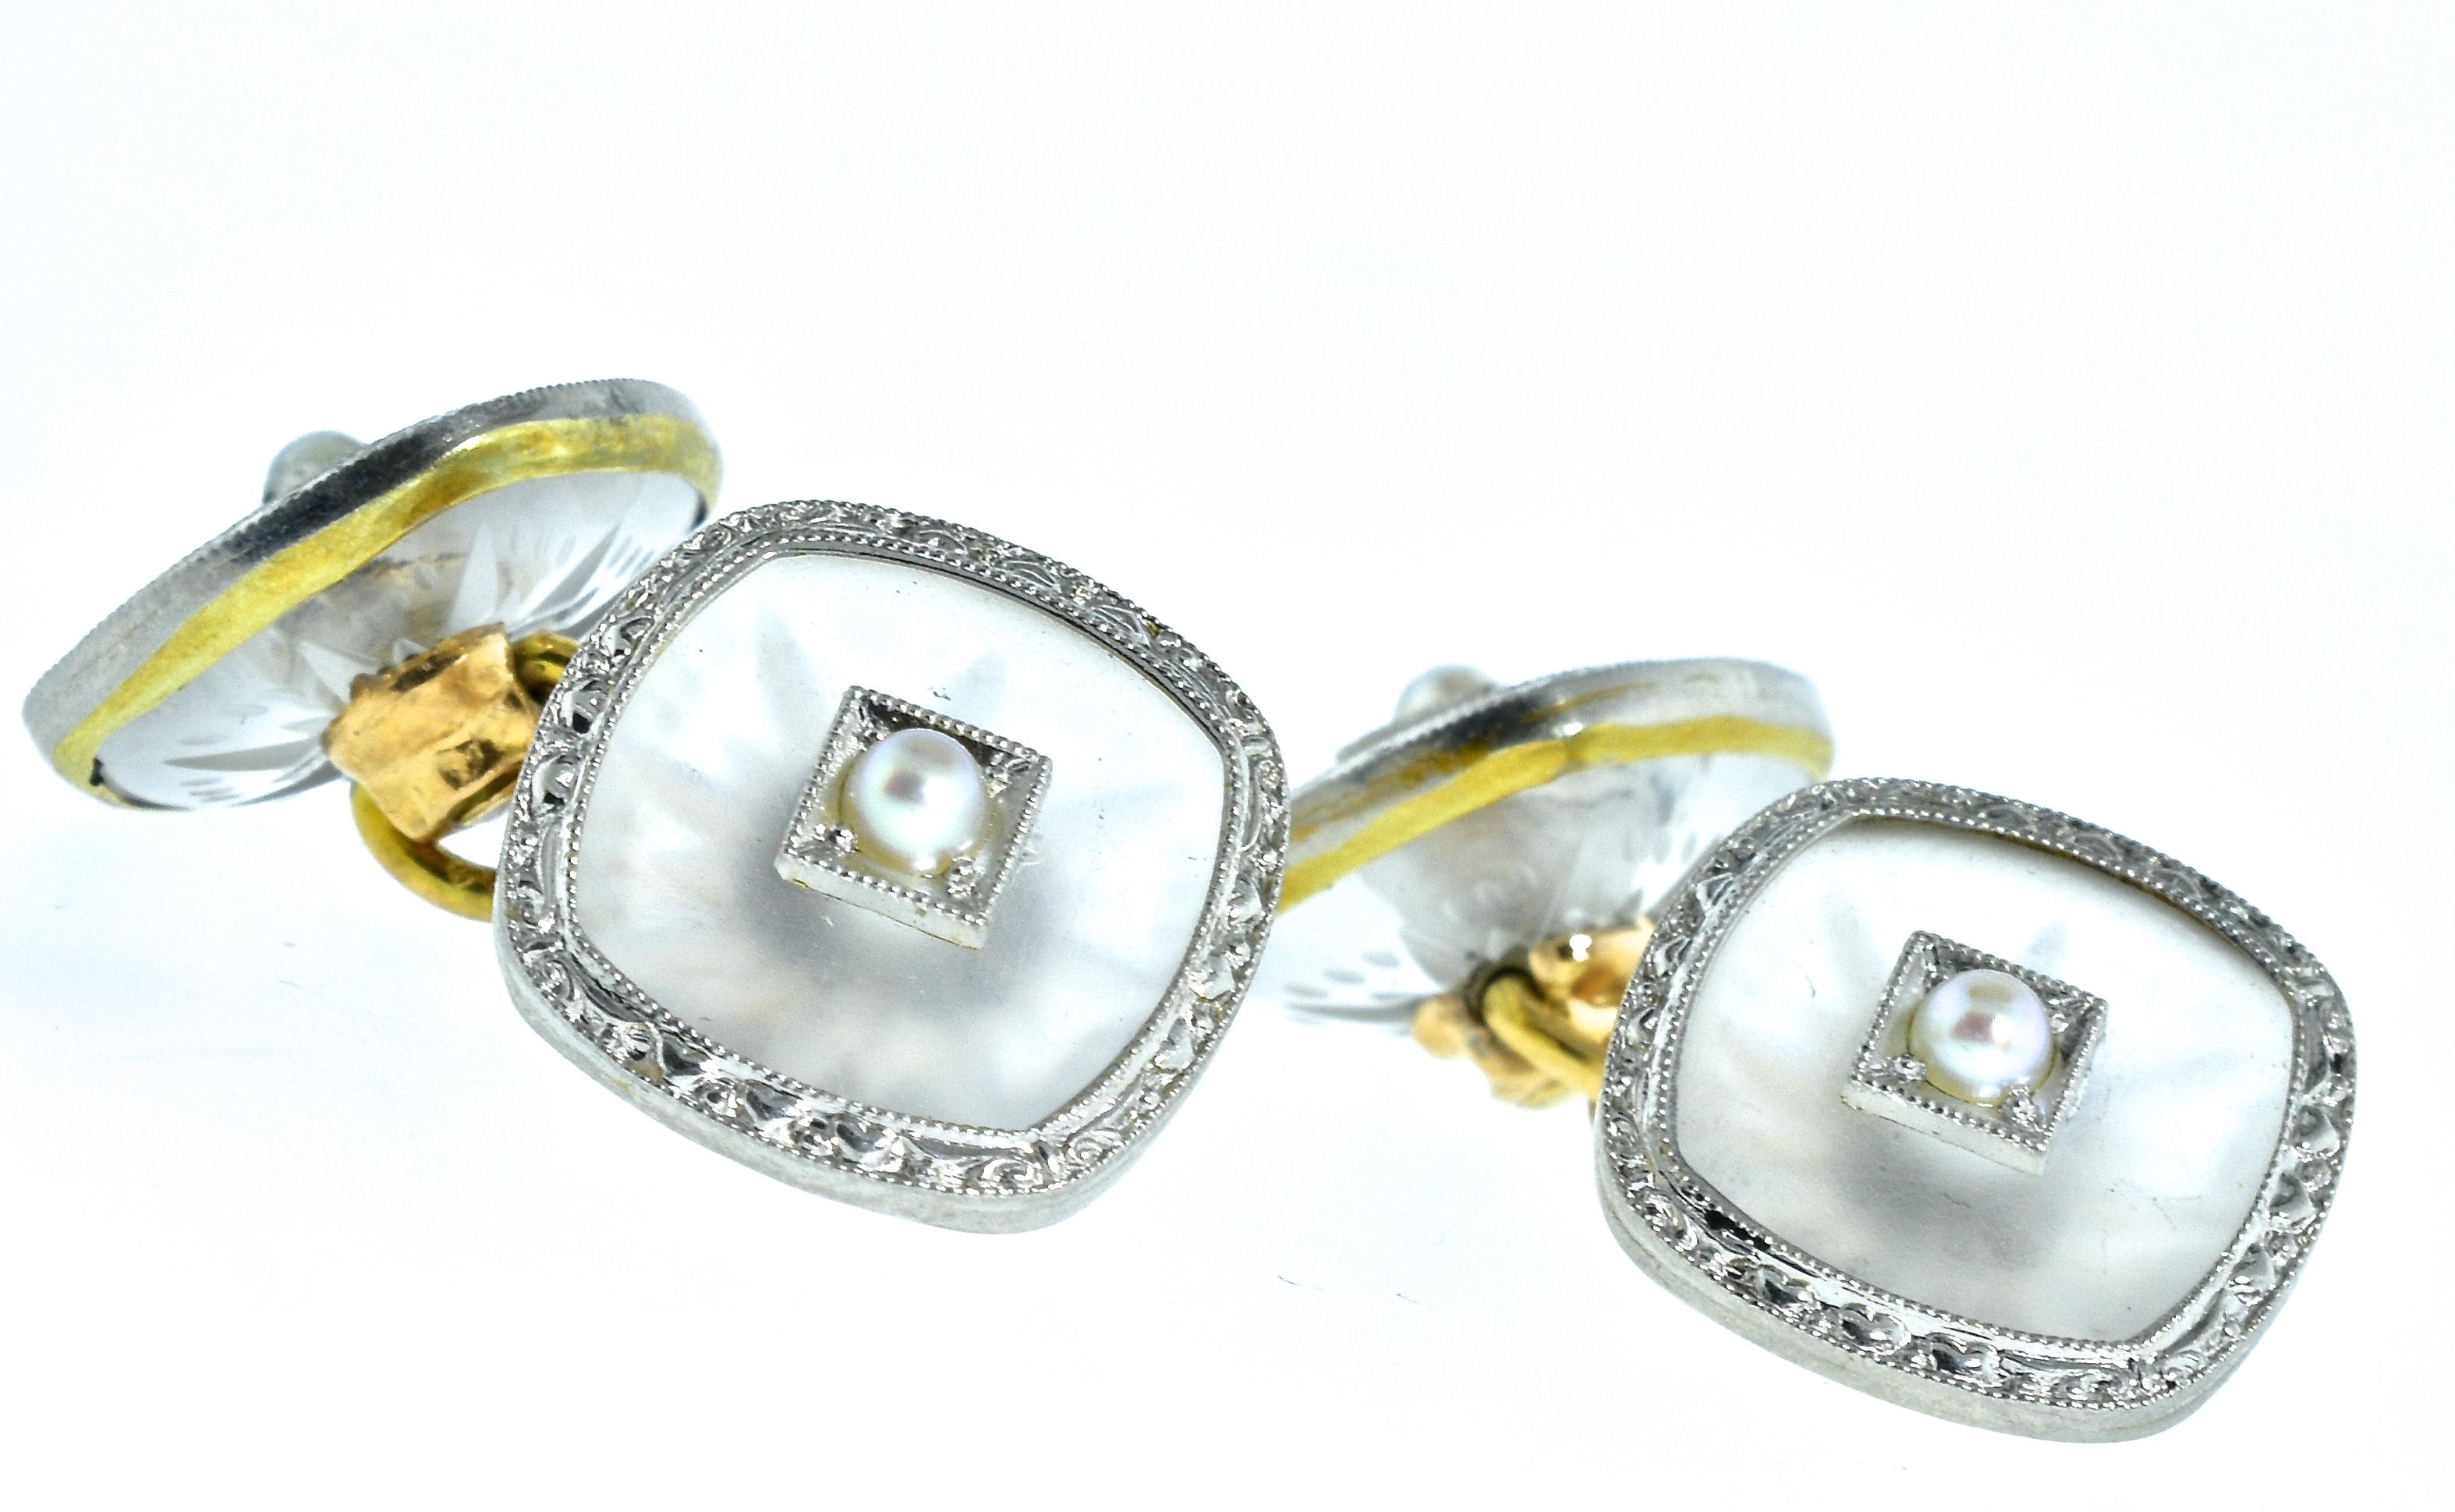 Art Deco cufflinks, circa 1930, centering a small seed pearl set in the frosted Rock Crystal and rimmed in both white and yellow gold with an etched design in the white gold.  These back to back cufflink are in fine condition.  The face of each is